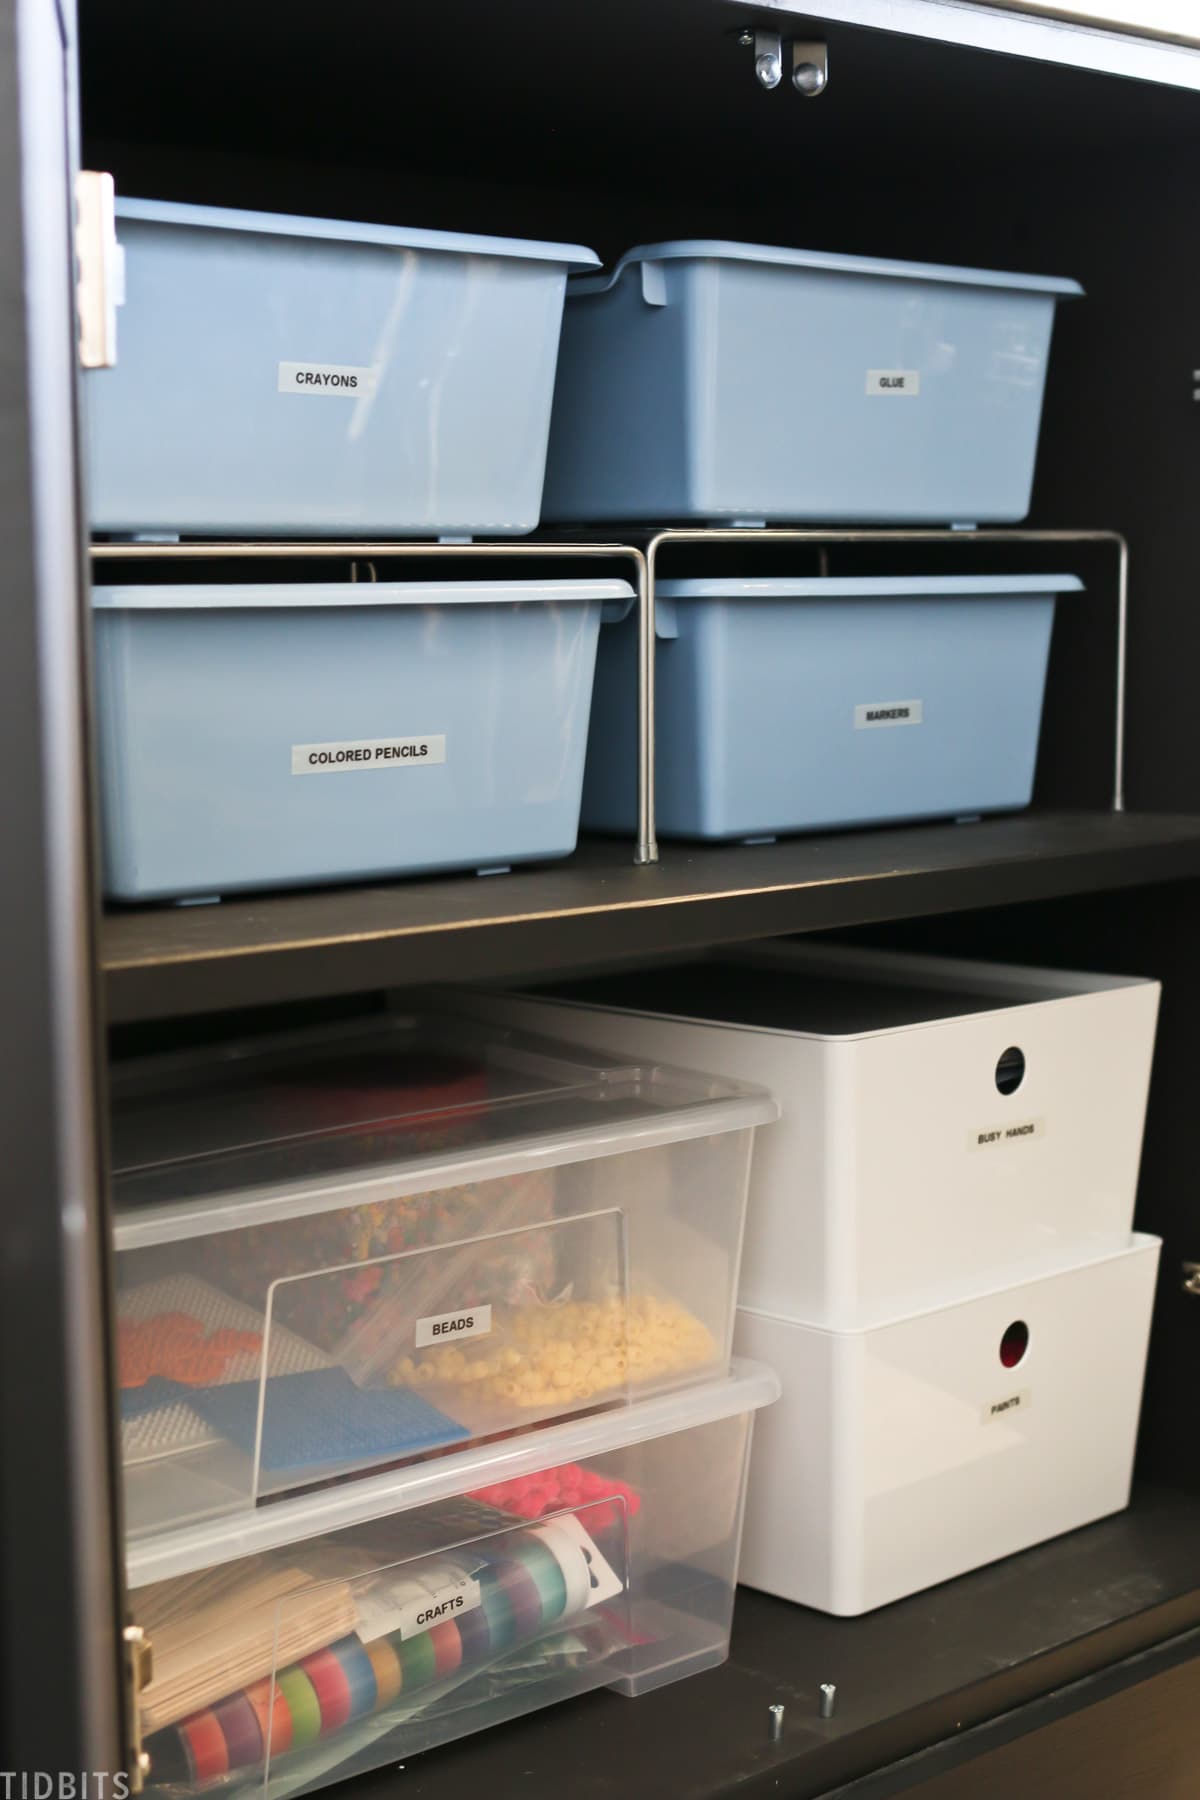 multiple containers with a label on each one indicating which office supplies they are storing